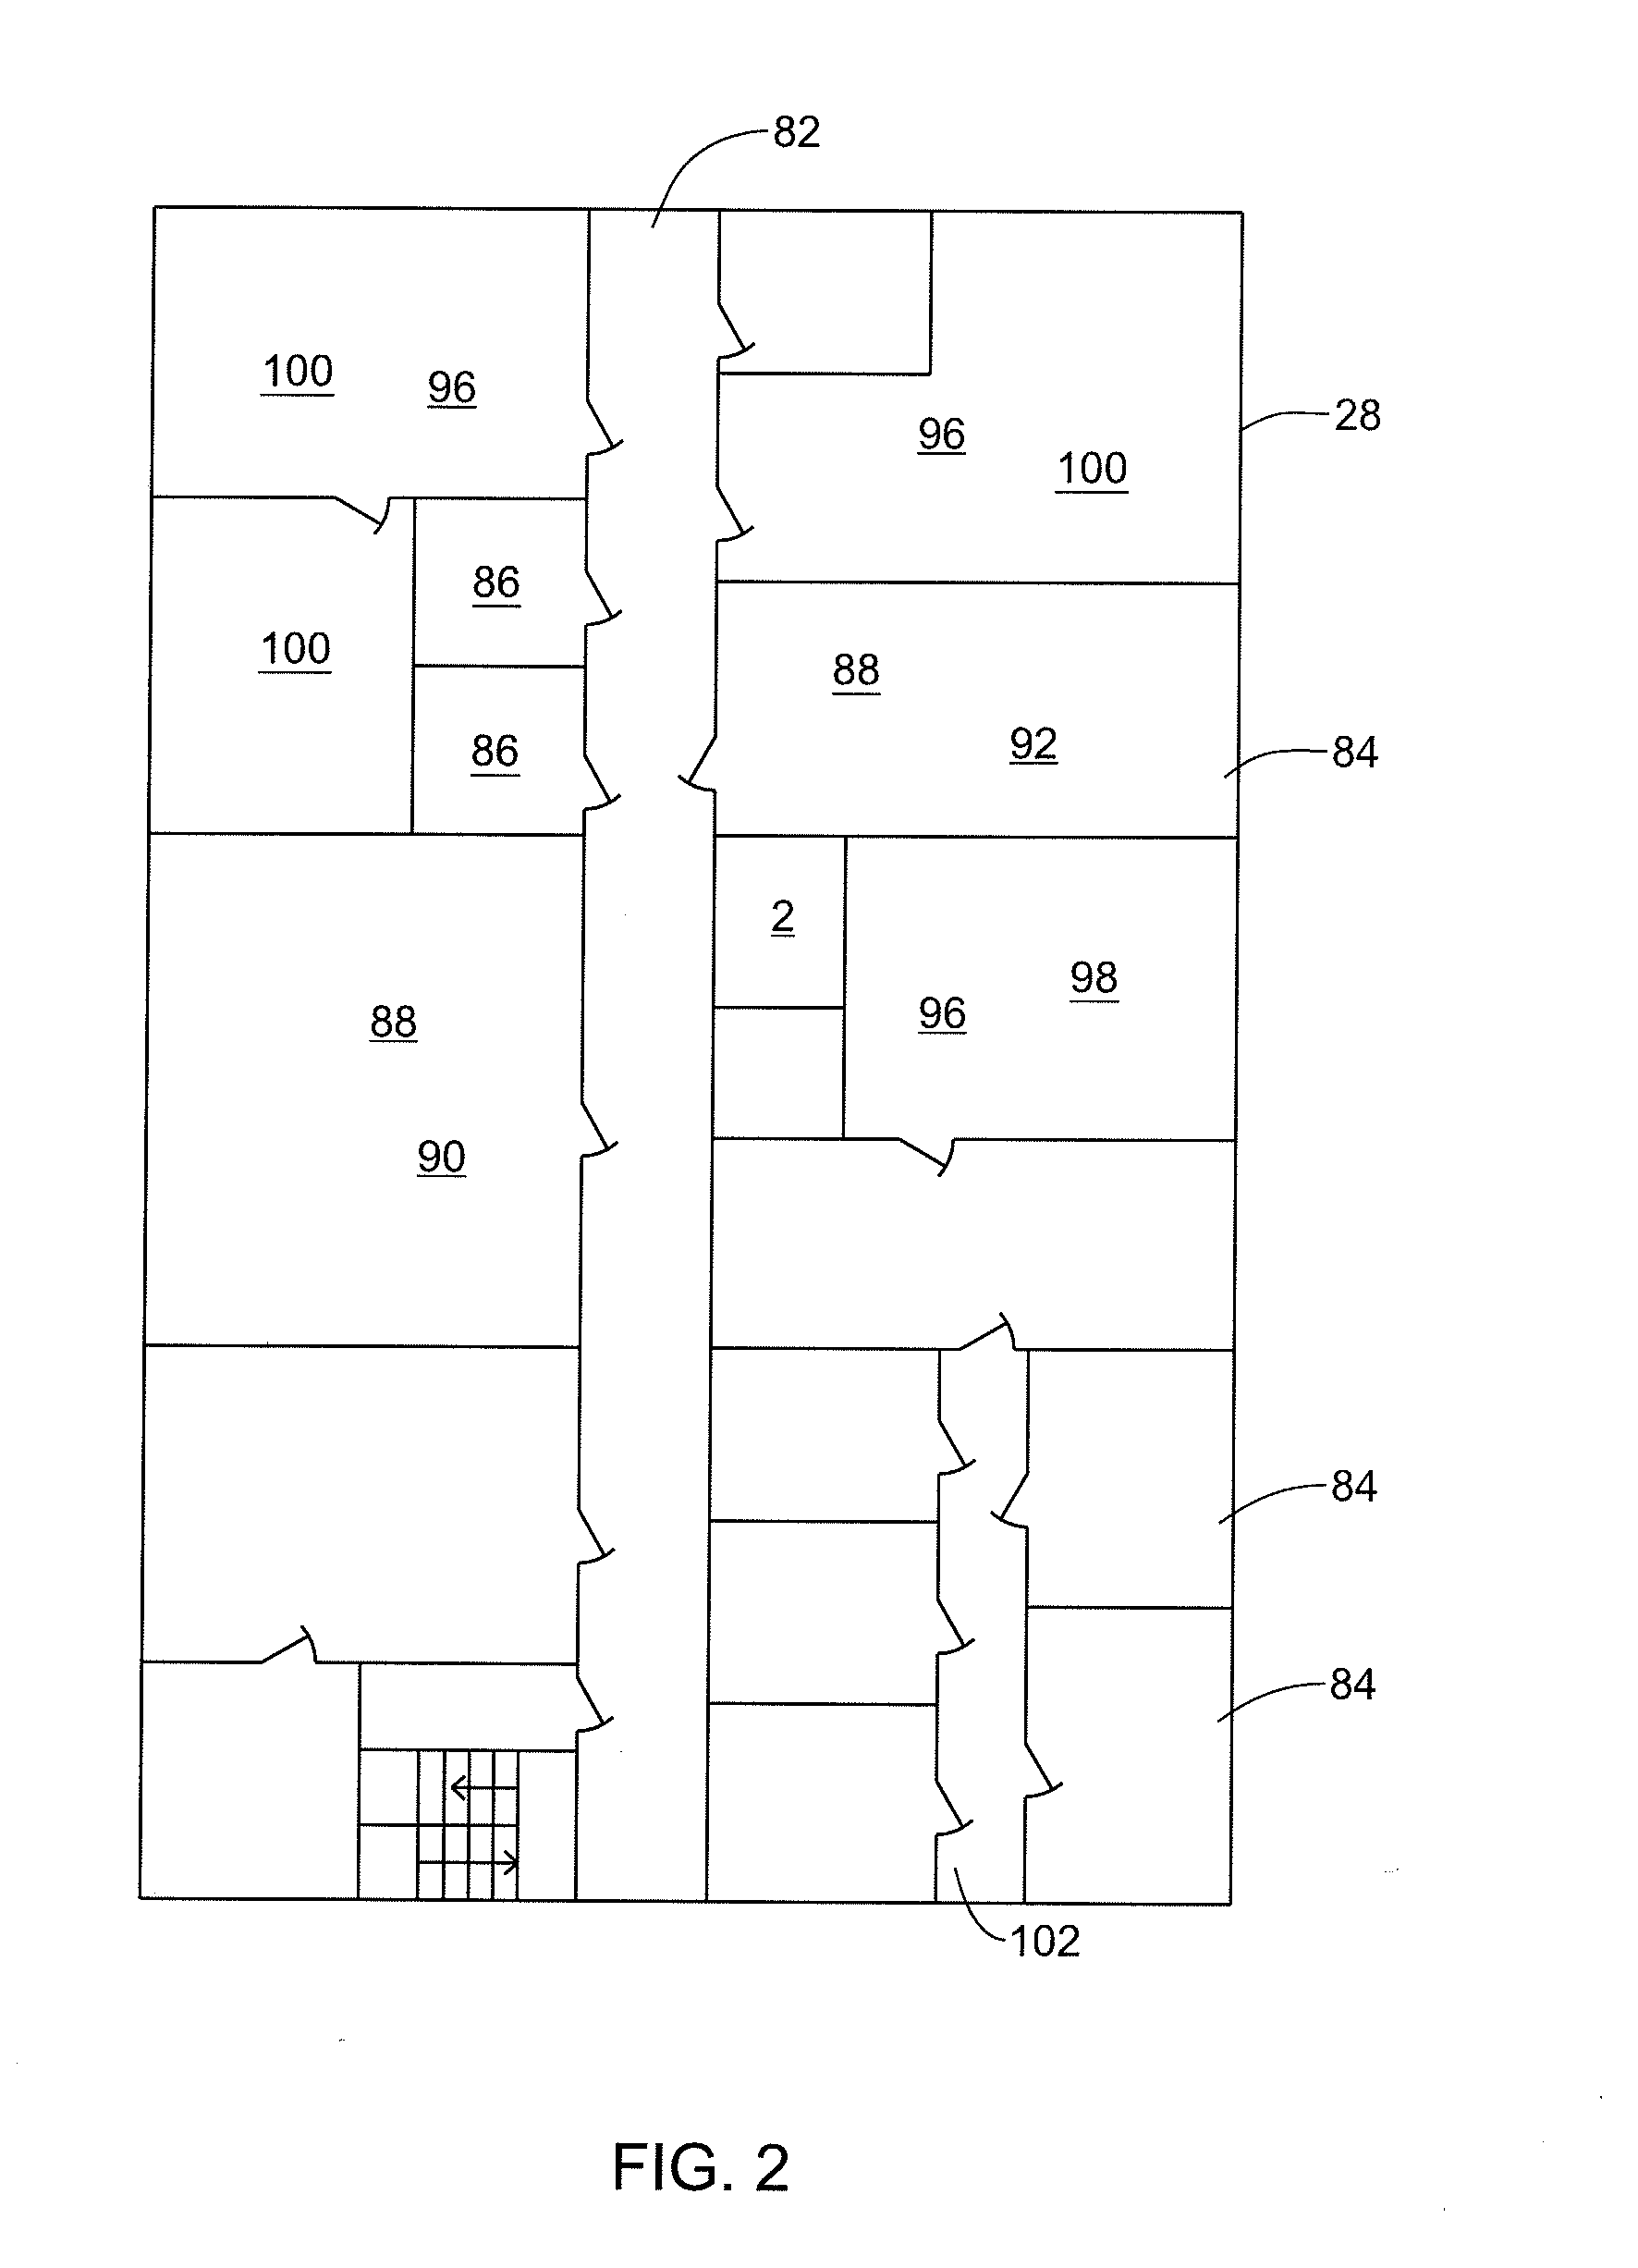 Method and System for Training Users Related to a Physical Access Control System